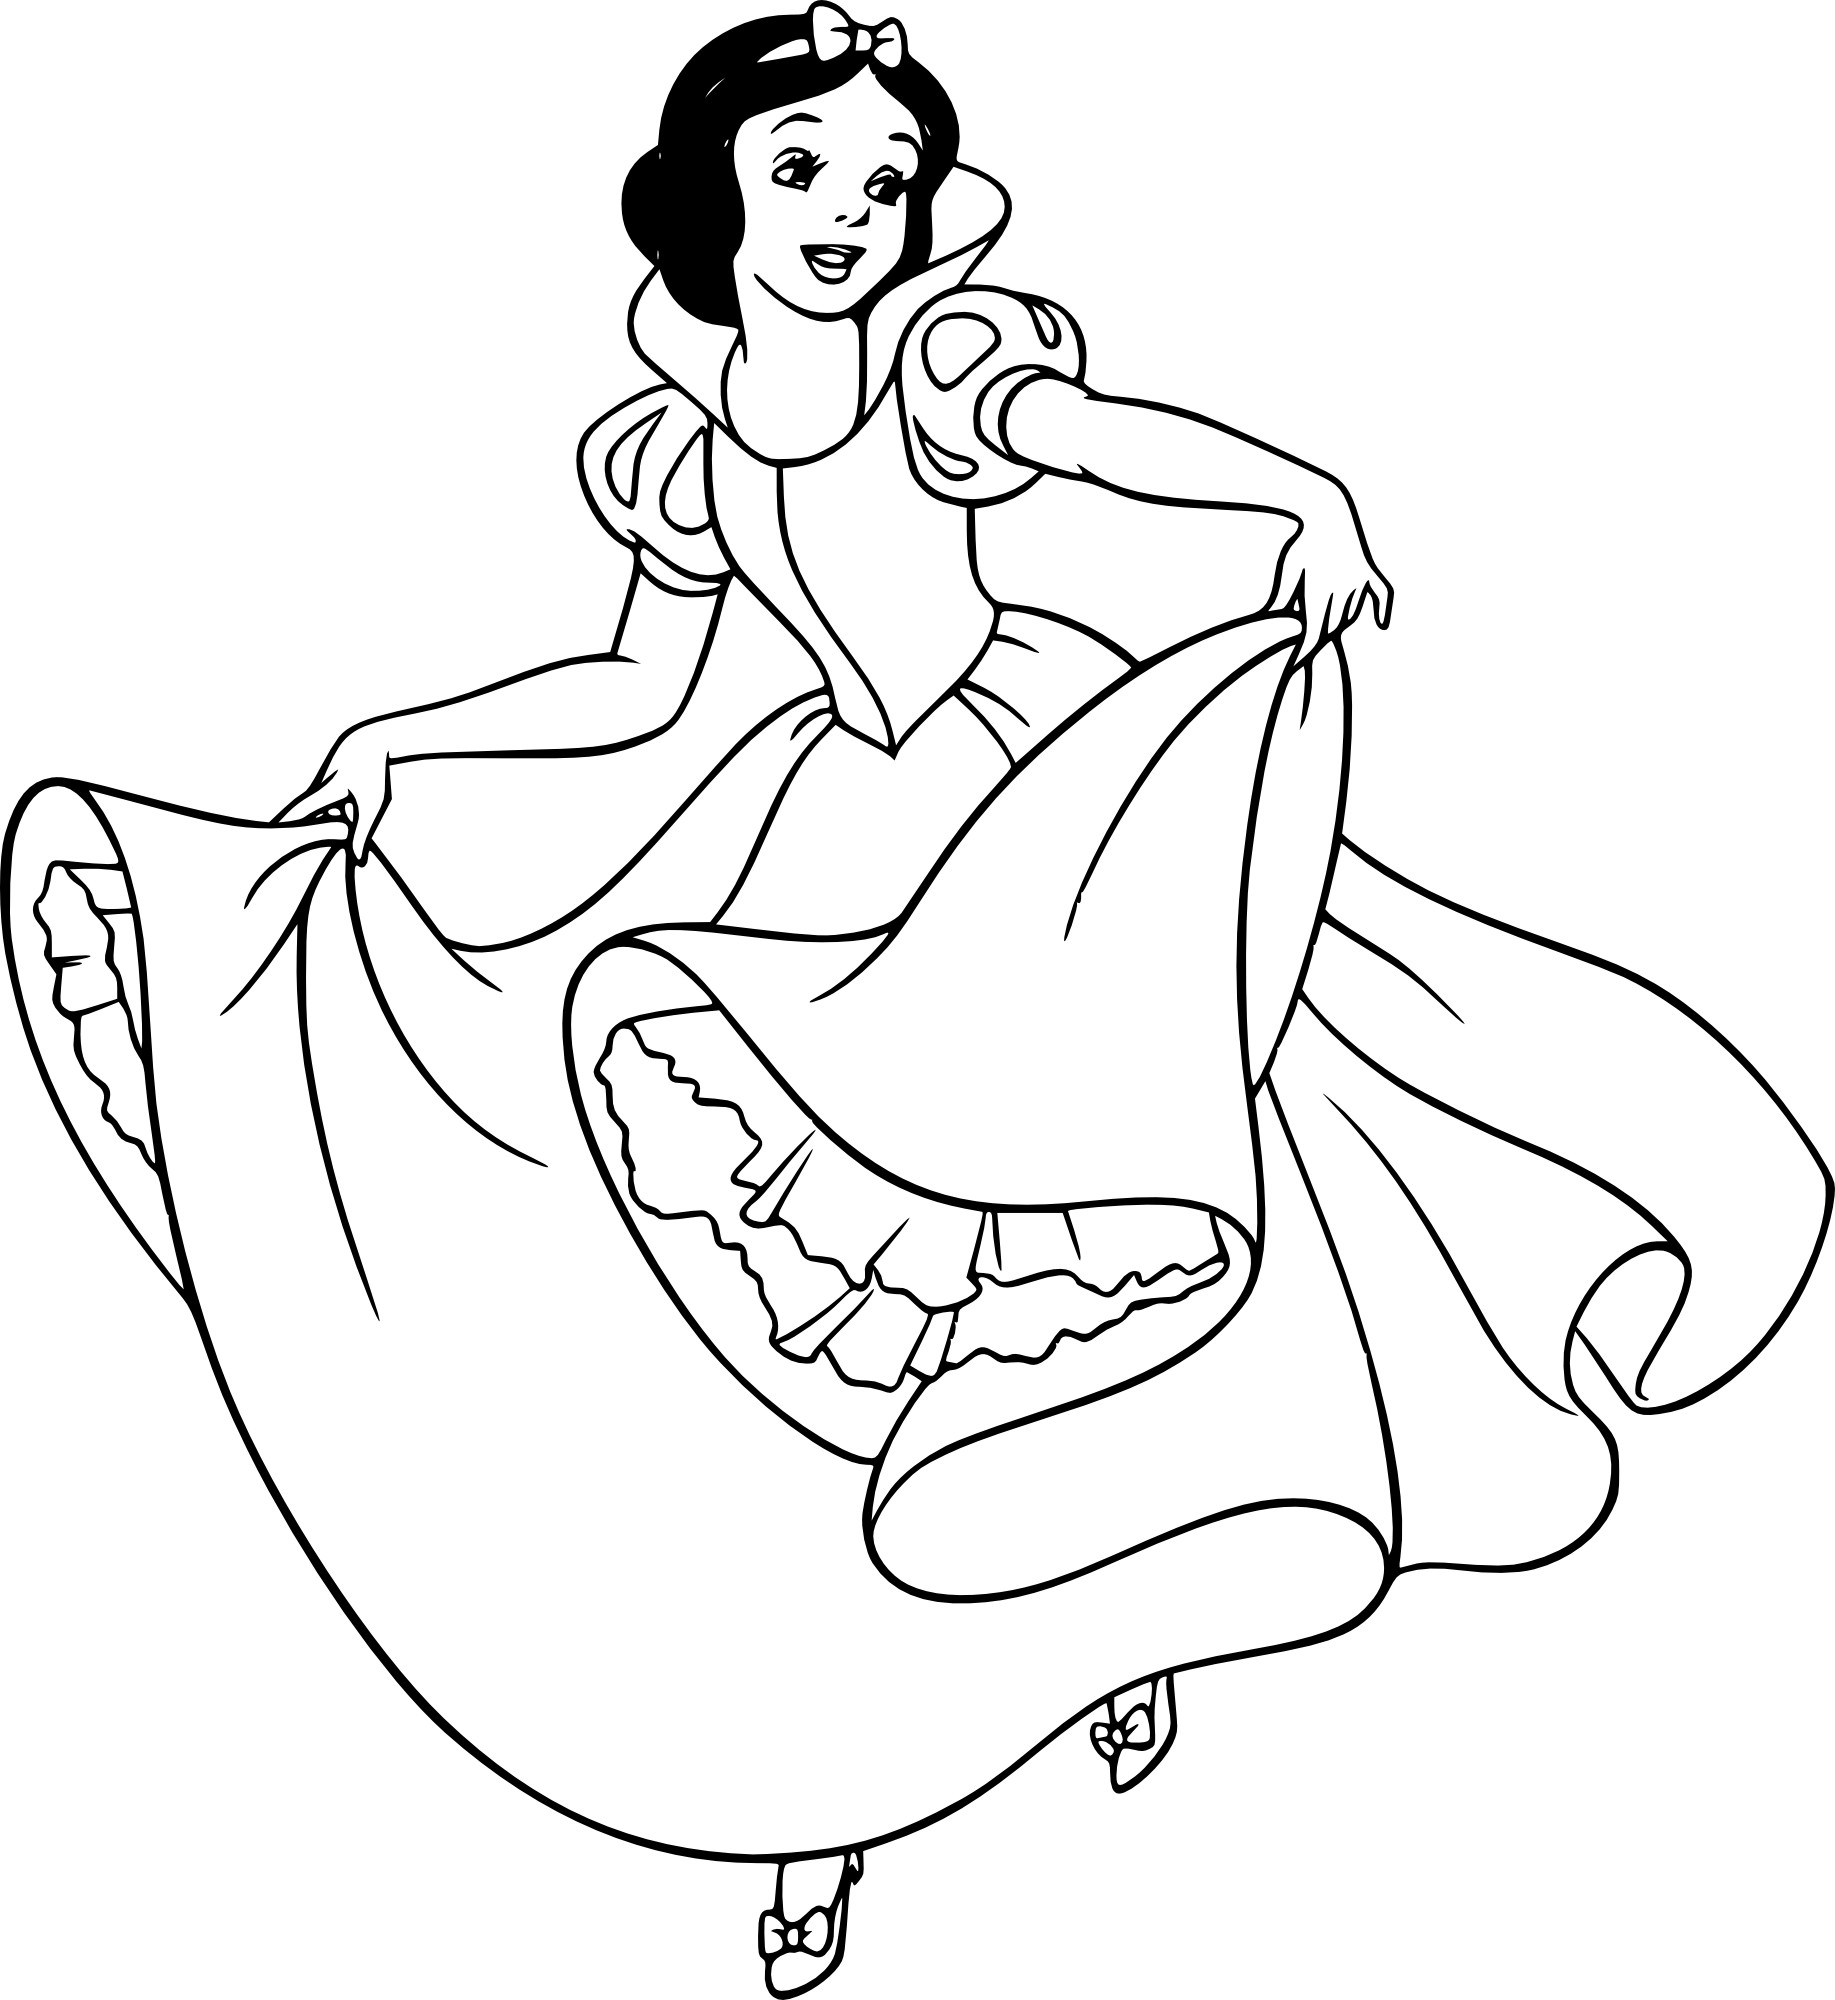 Disney Snow White Coloring Pages At Free Printable Colorings Pages To Print 